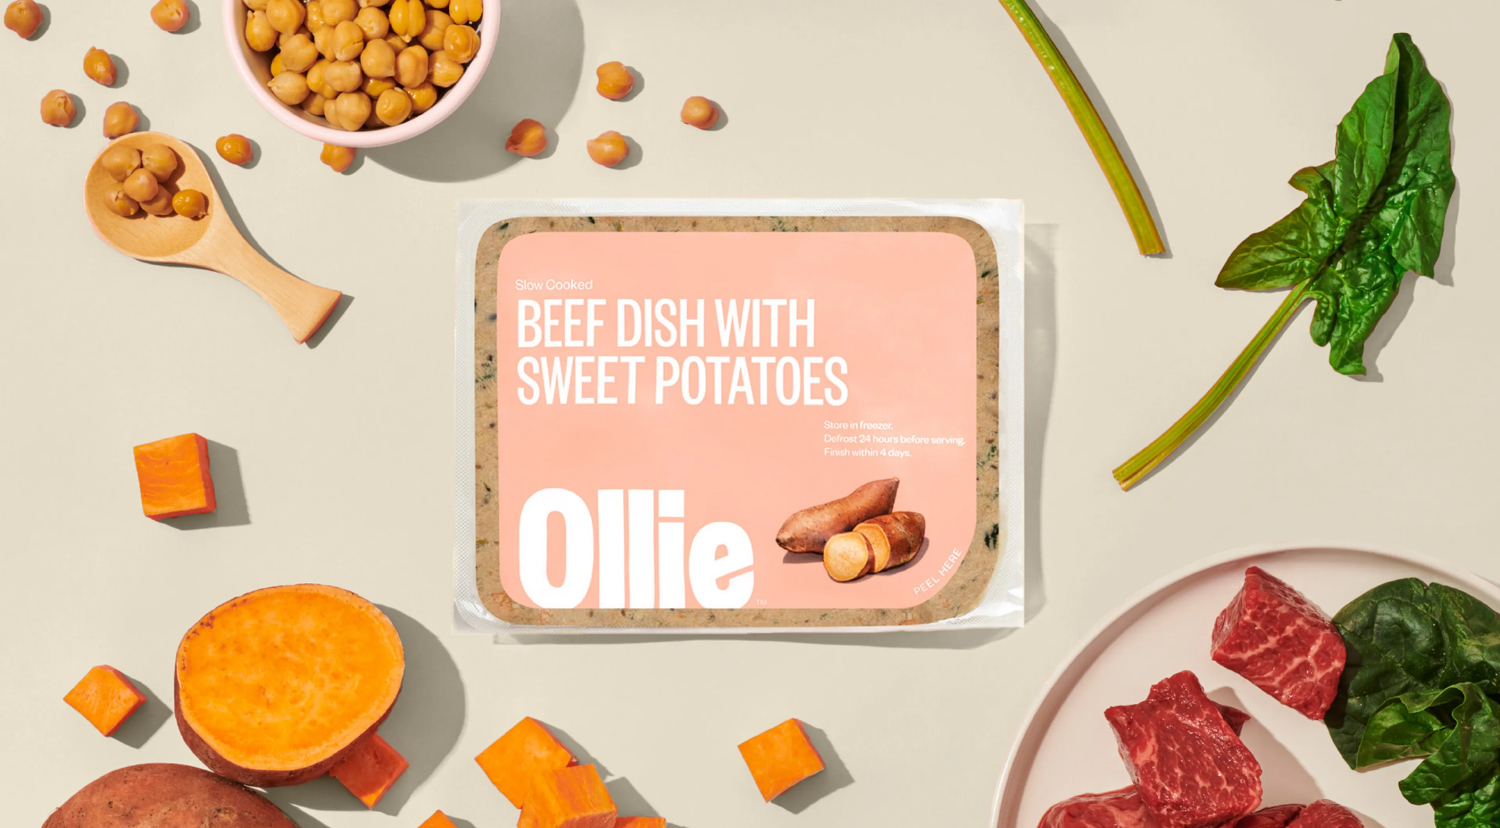 Ollie Fresh Beef Dish With Sweet Potatoes